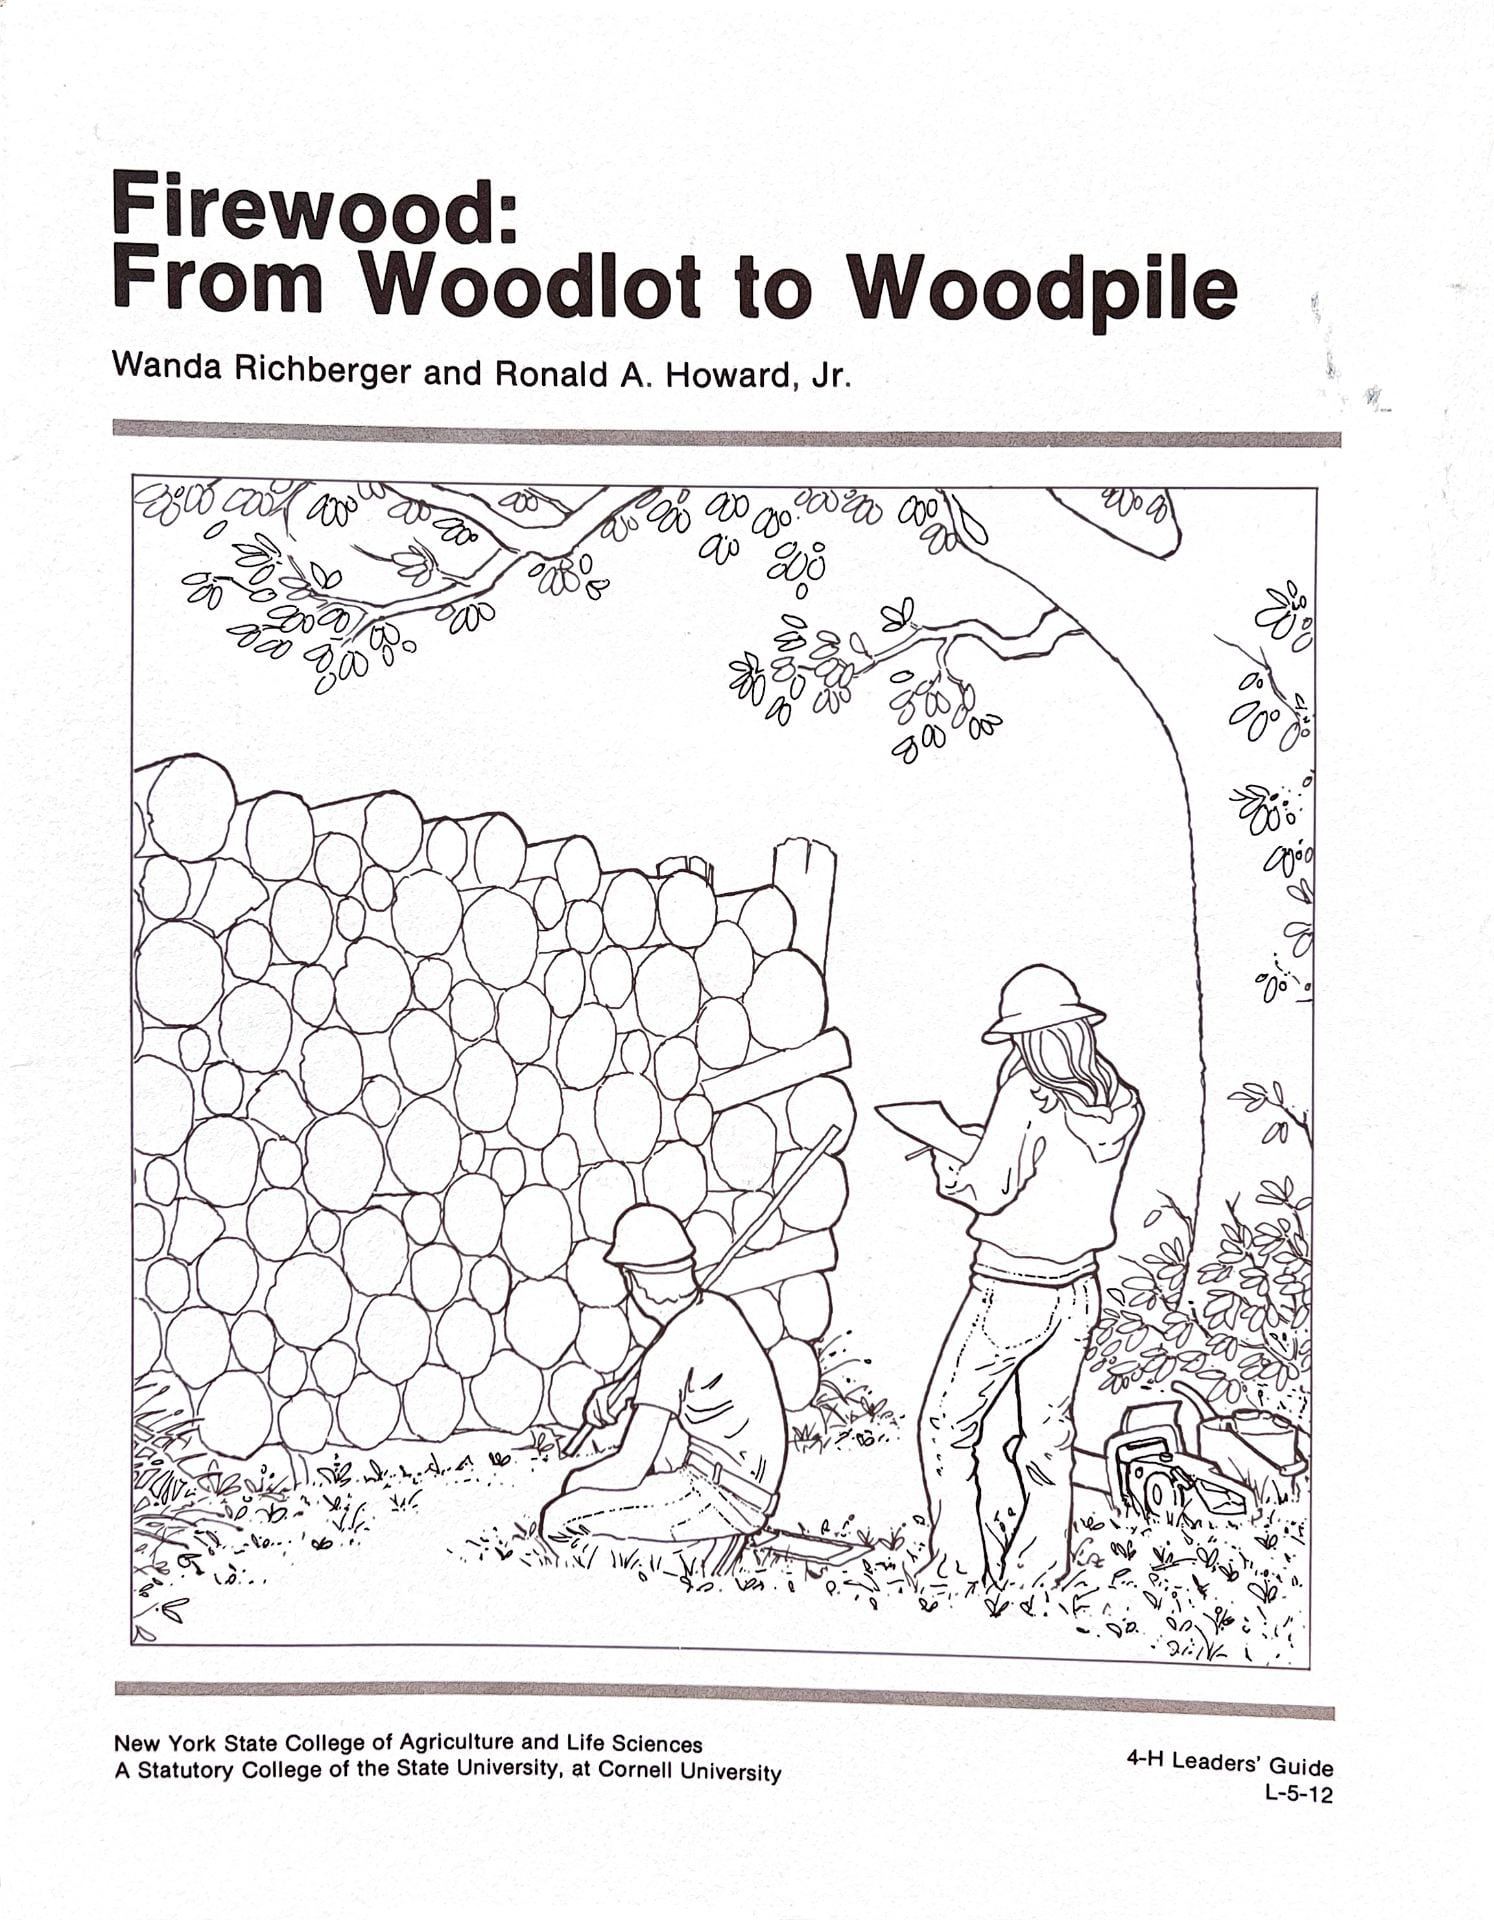 Firewood cover page